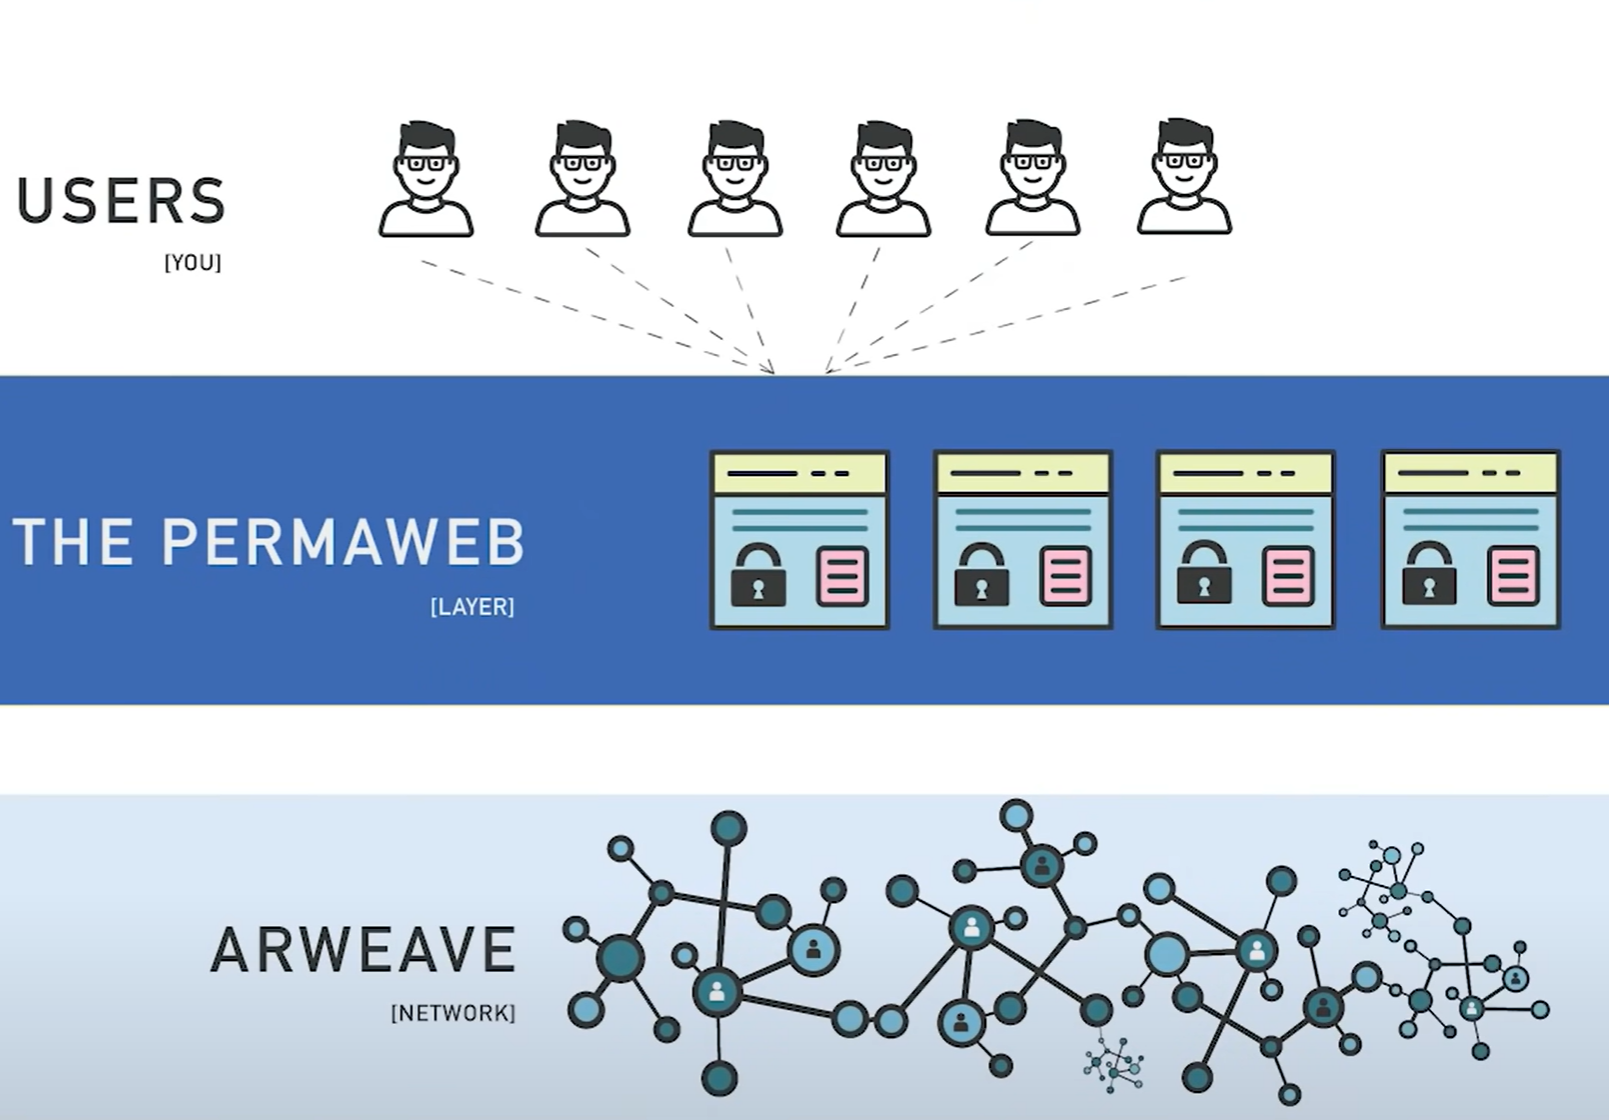 Ther Permaweb is where the DApps and users are interacting with the Arweave data. The Permaweb could alos be interacted with regular Web 2, including Google etc.